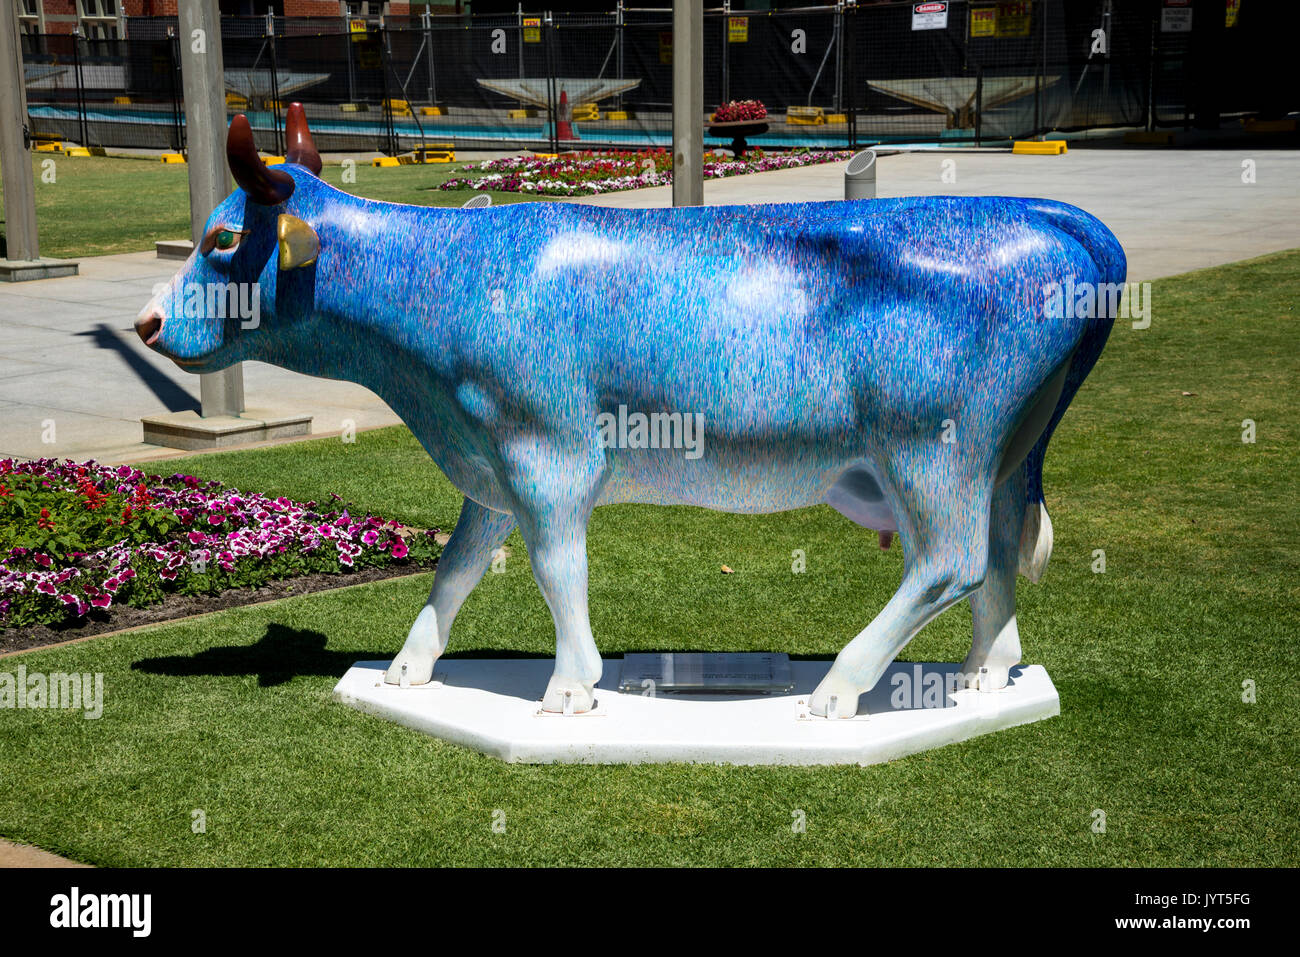 Meet Moouis Vuitton, the life-size cow purse sculpture of Forest Hills -  Lakewood/East Dallas